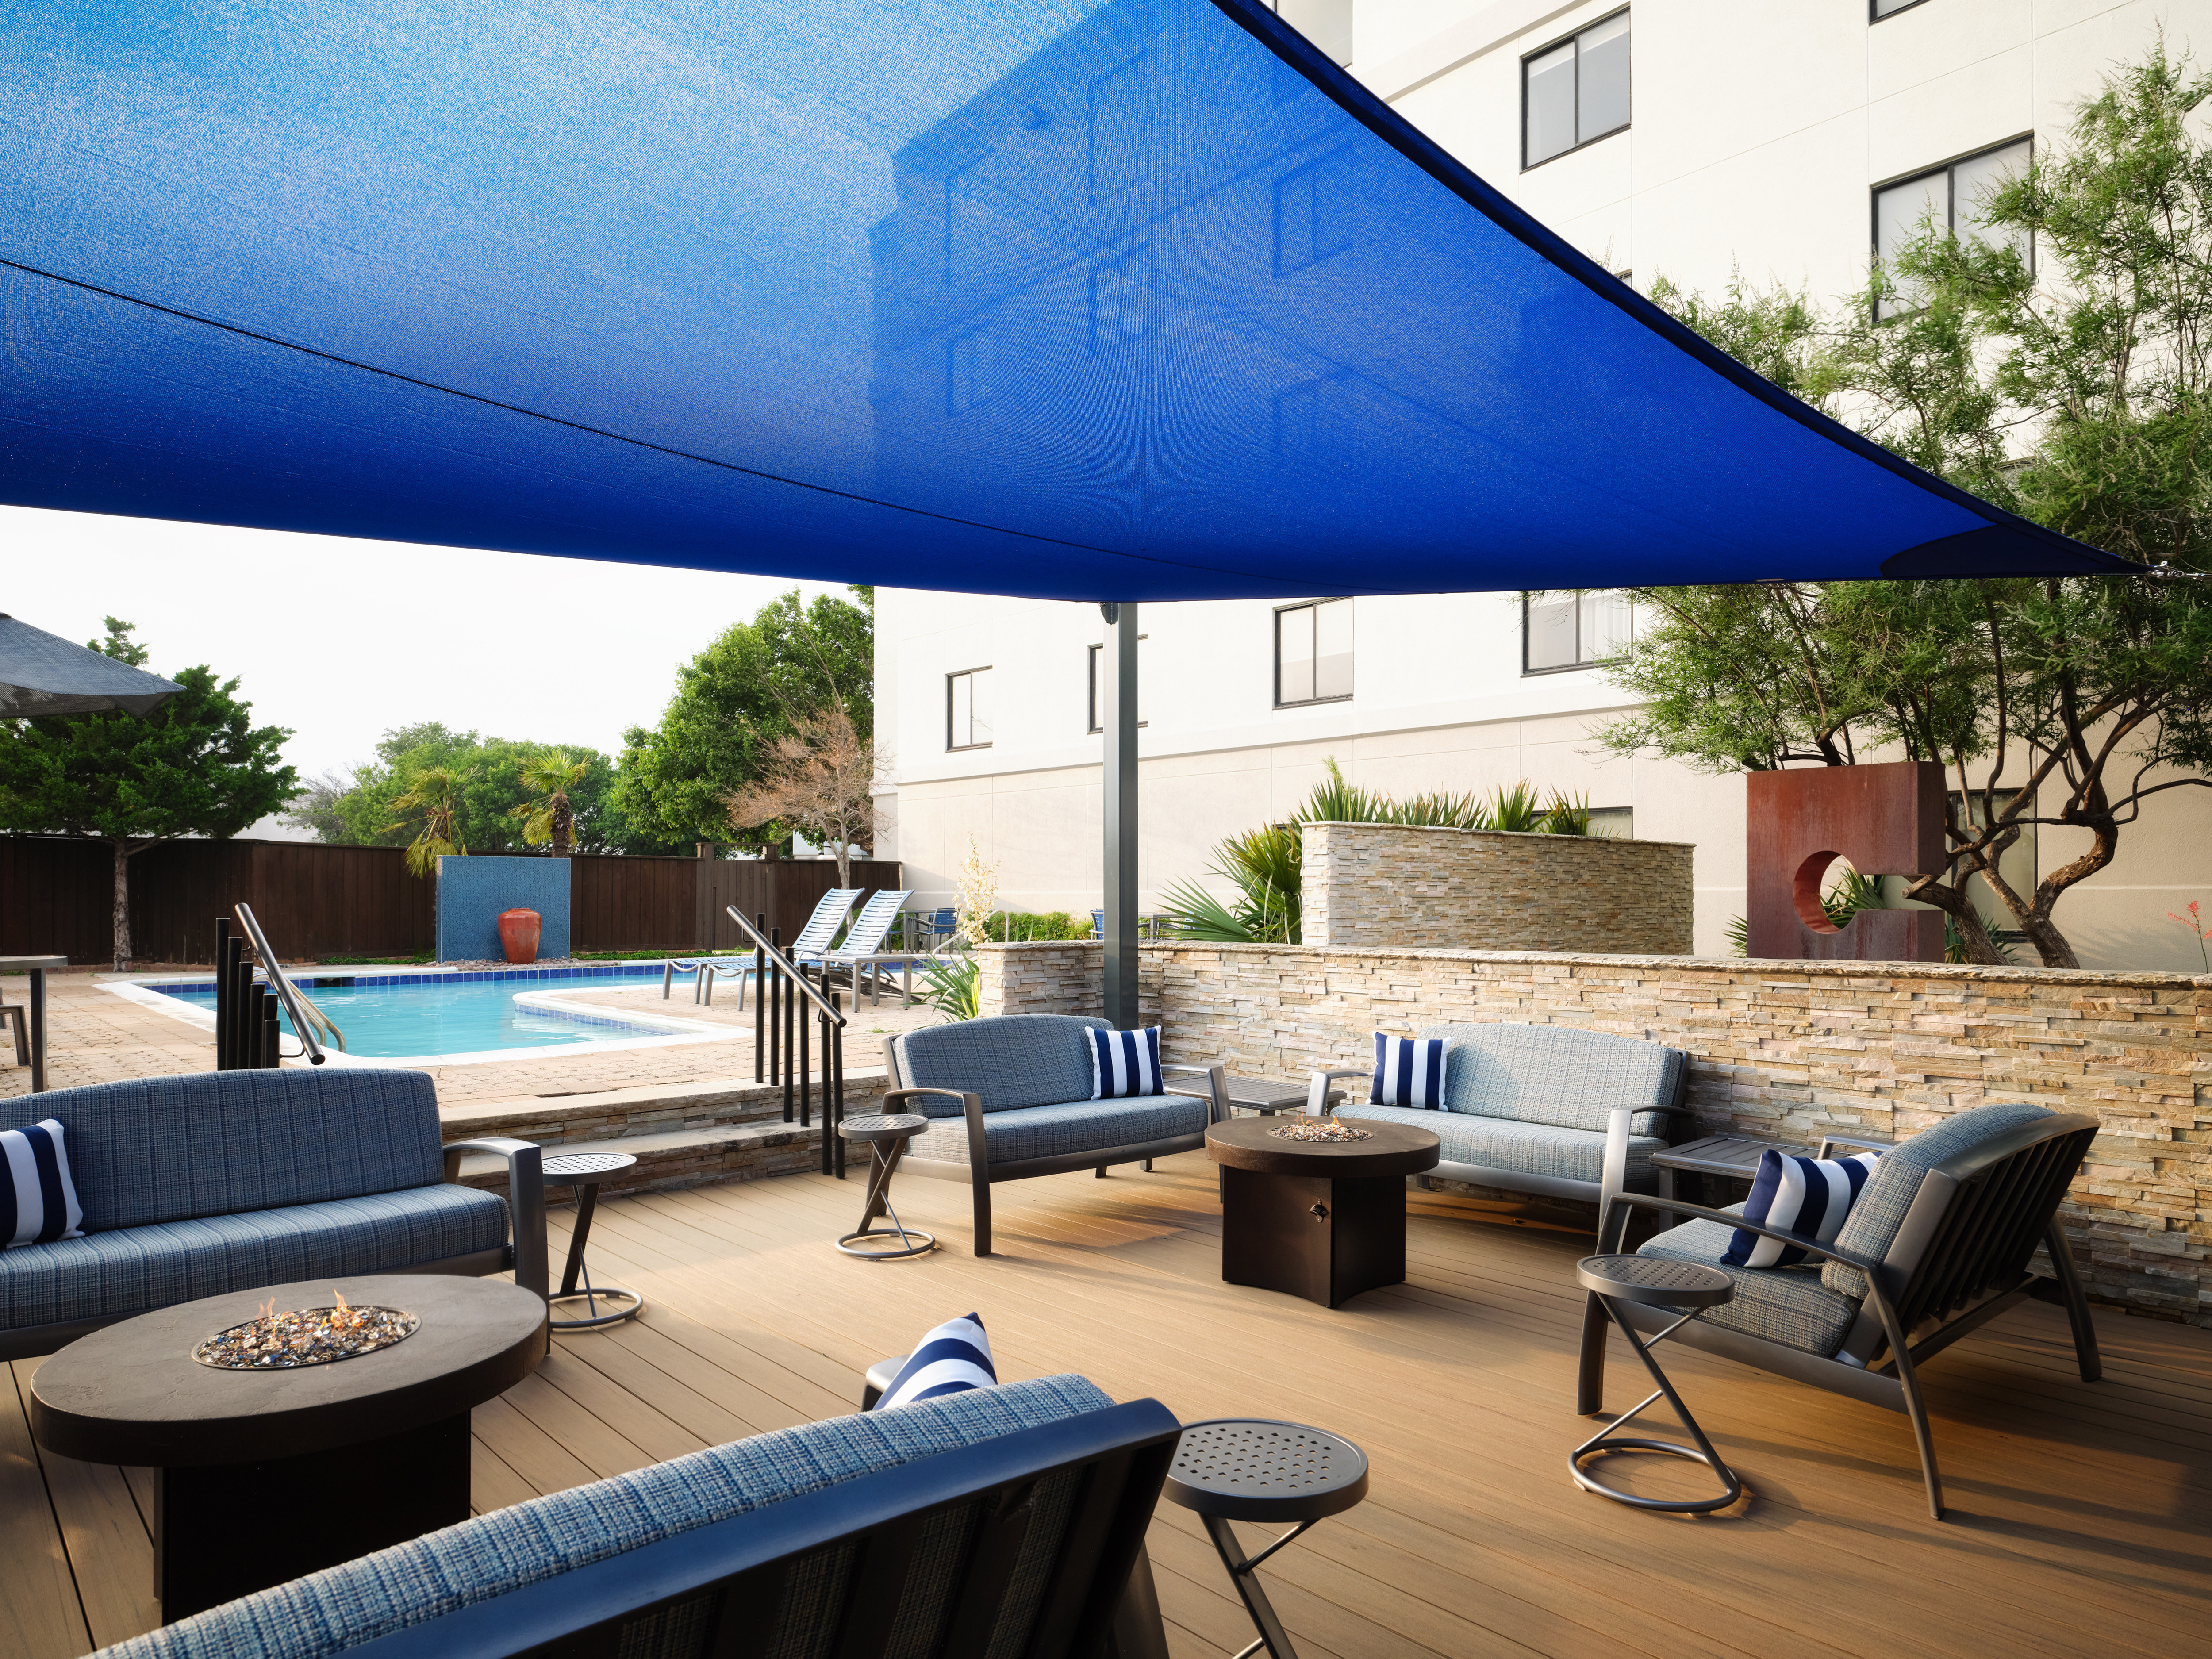 hotel patio, patio furniture, fire pit, outdoor pool